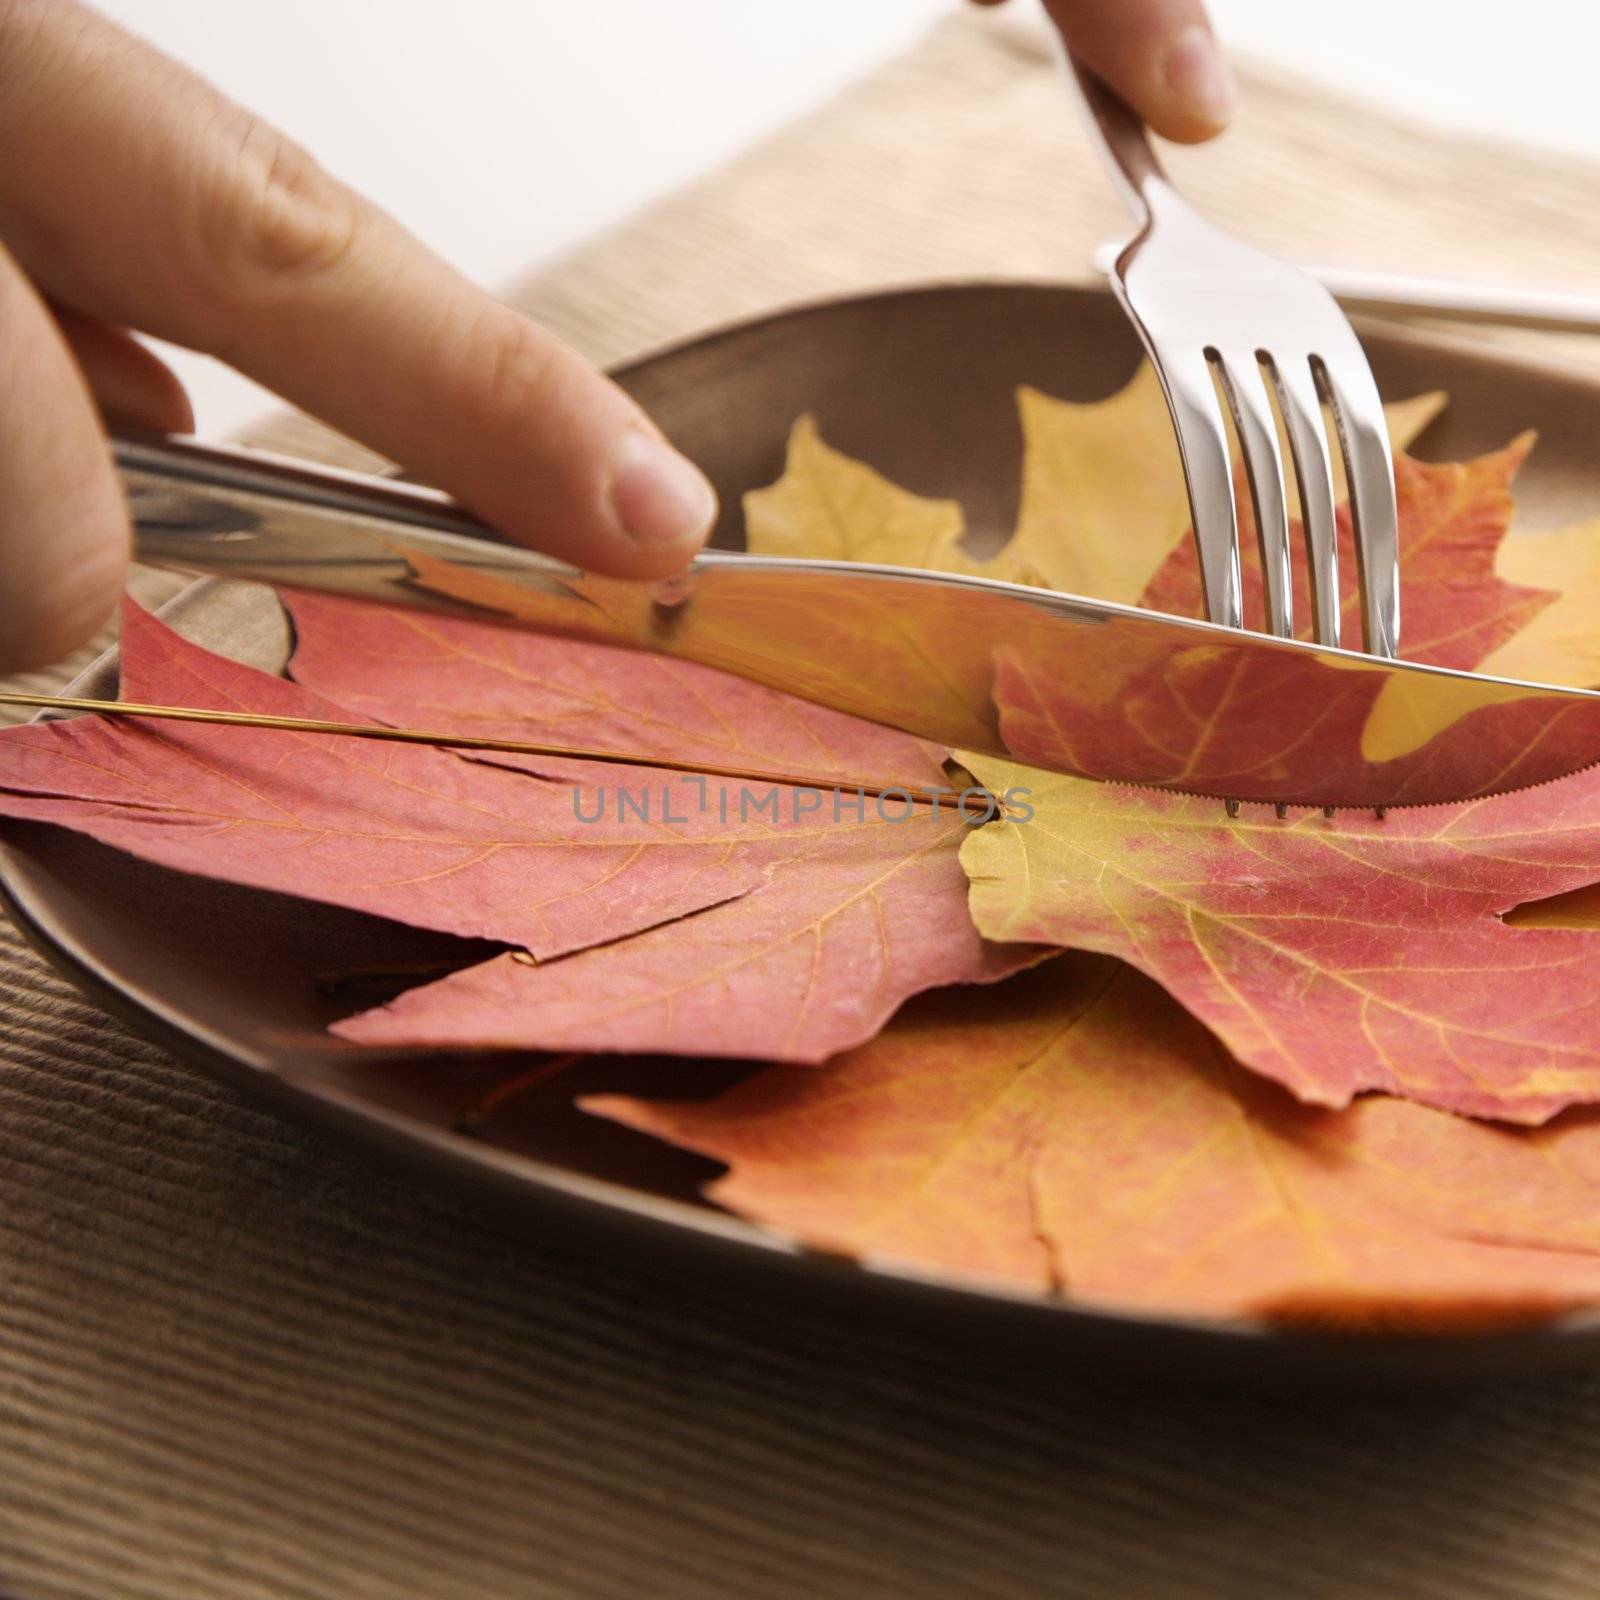 Close-up of person's hands carving meal of multicolored leaves using knife and fork.